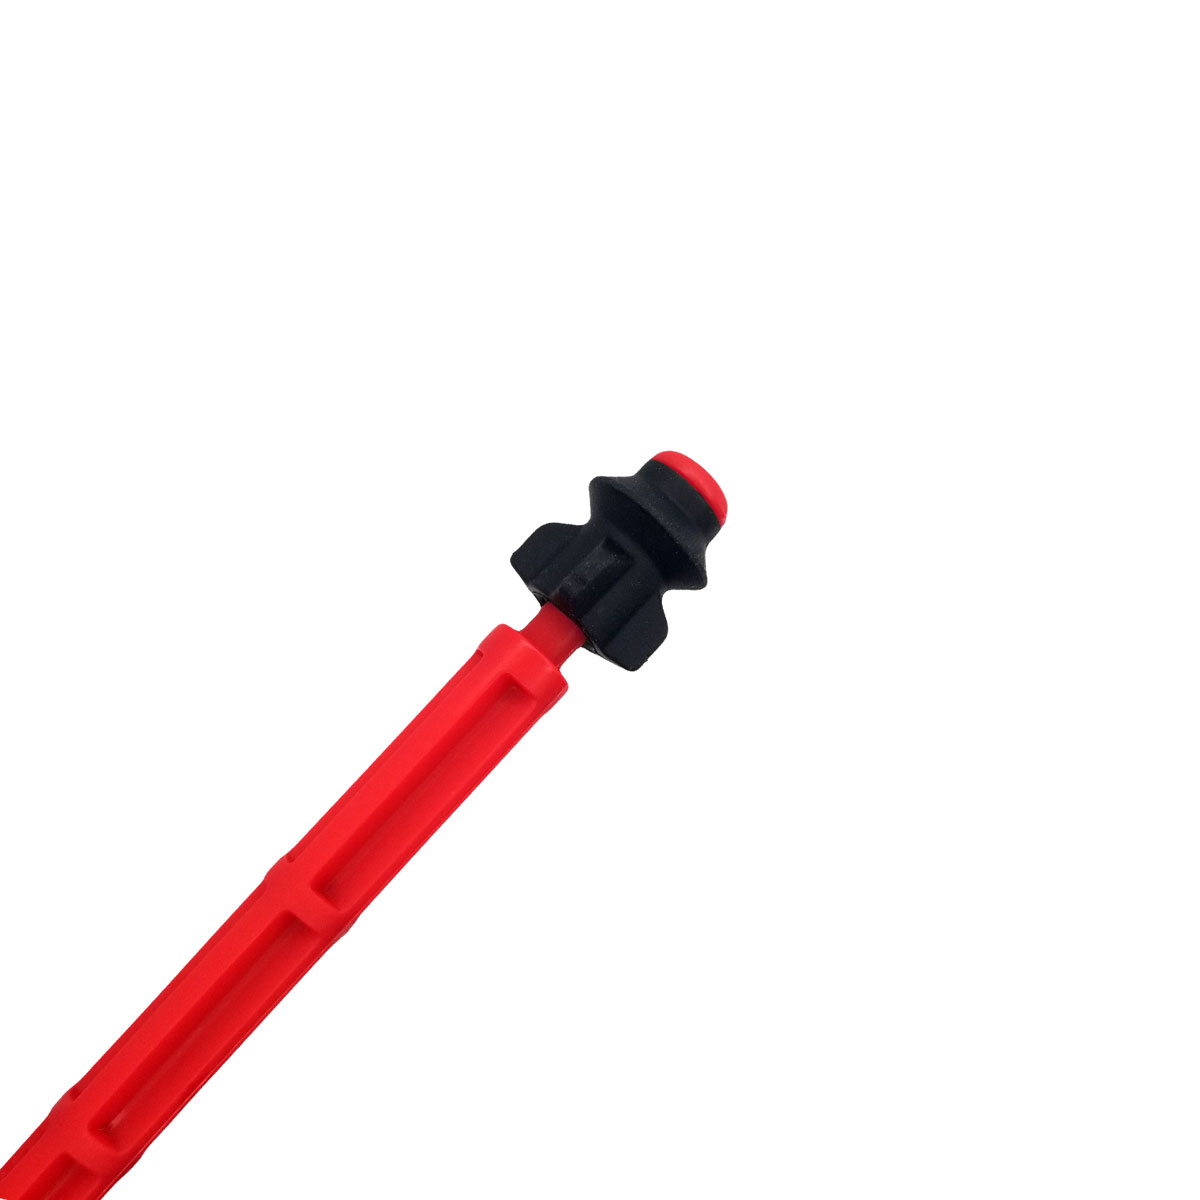 Exalt Paintball Barrel Maid Swab Squeegee Solid Color Red for sale online 